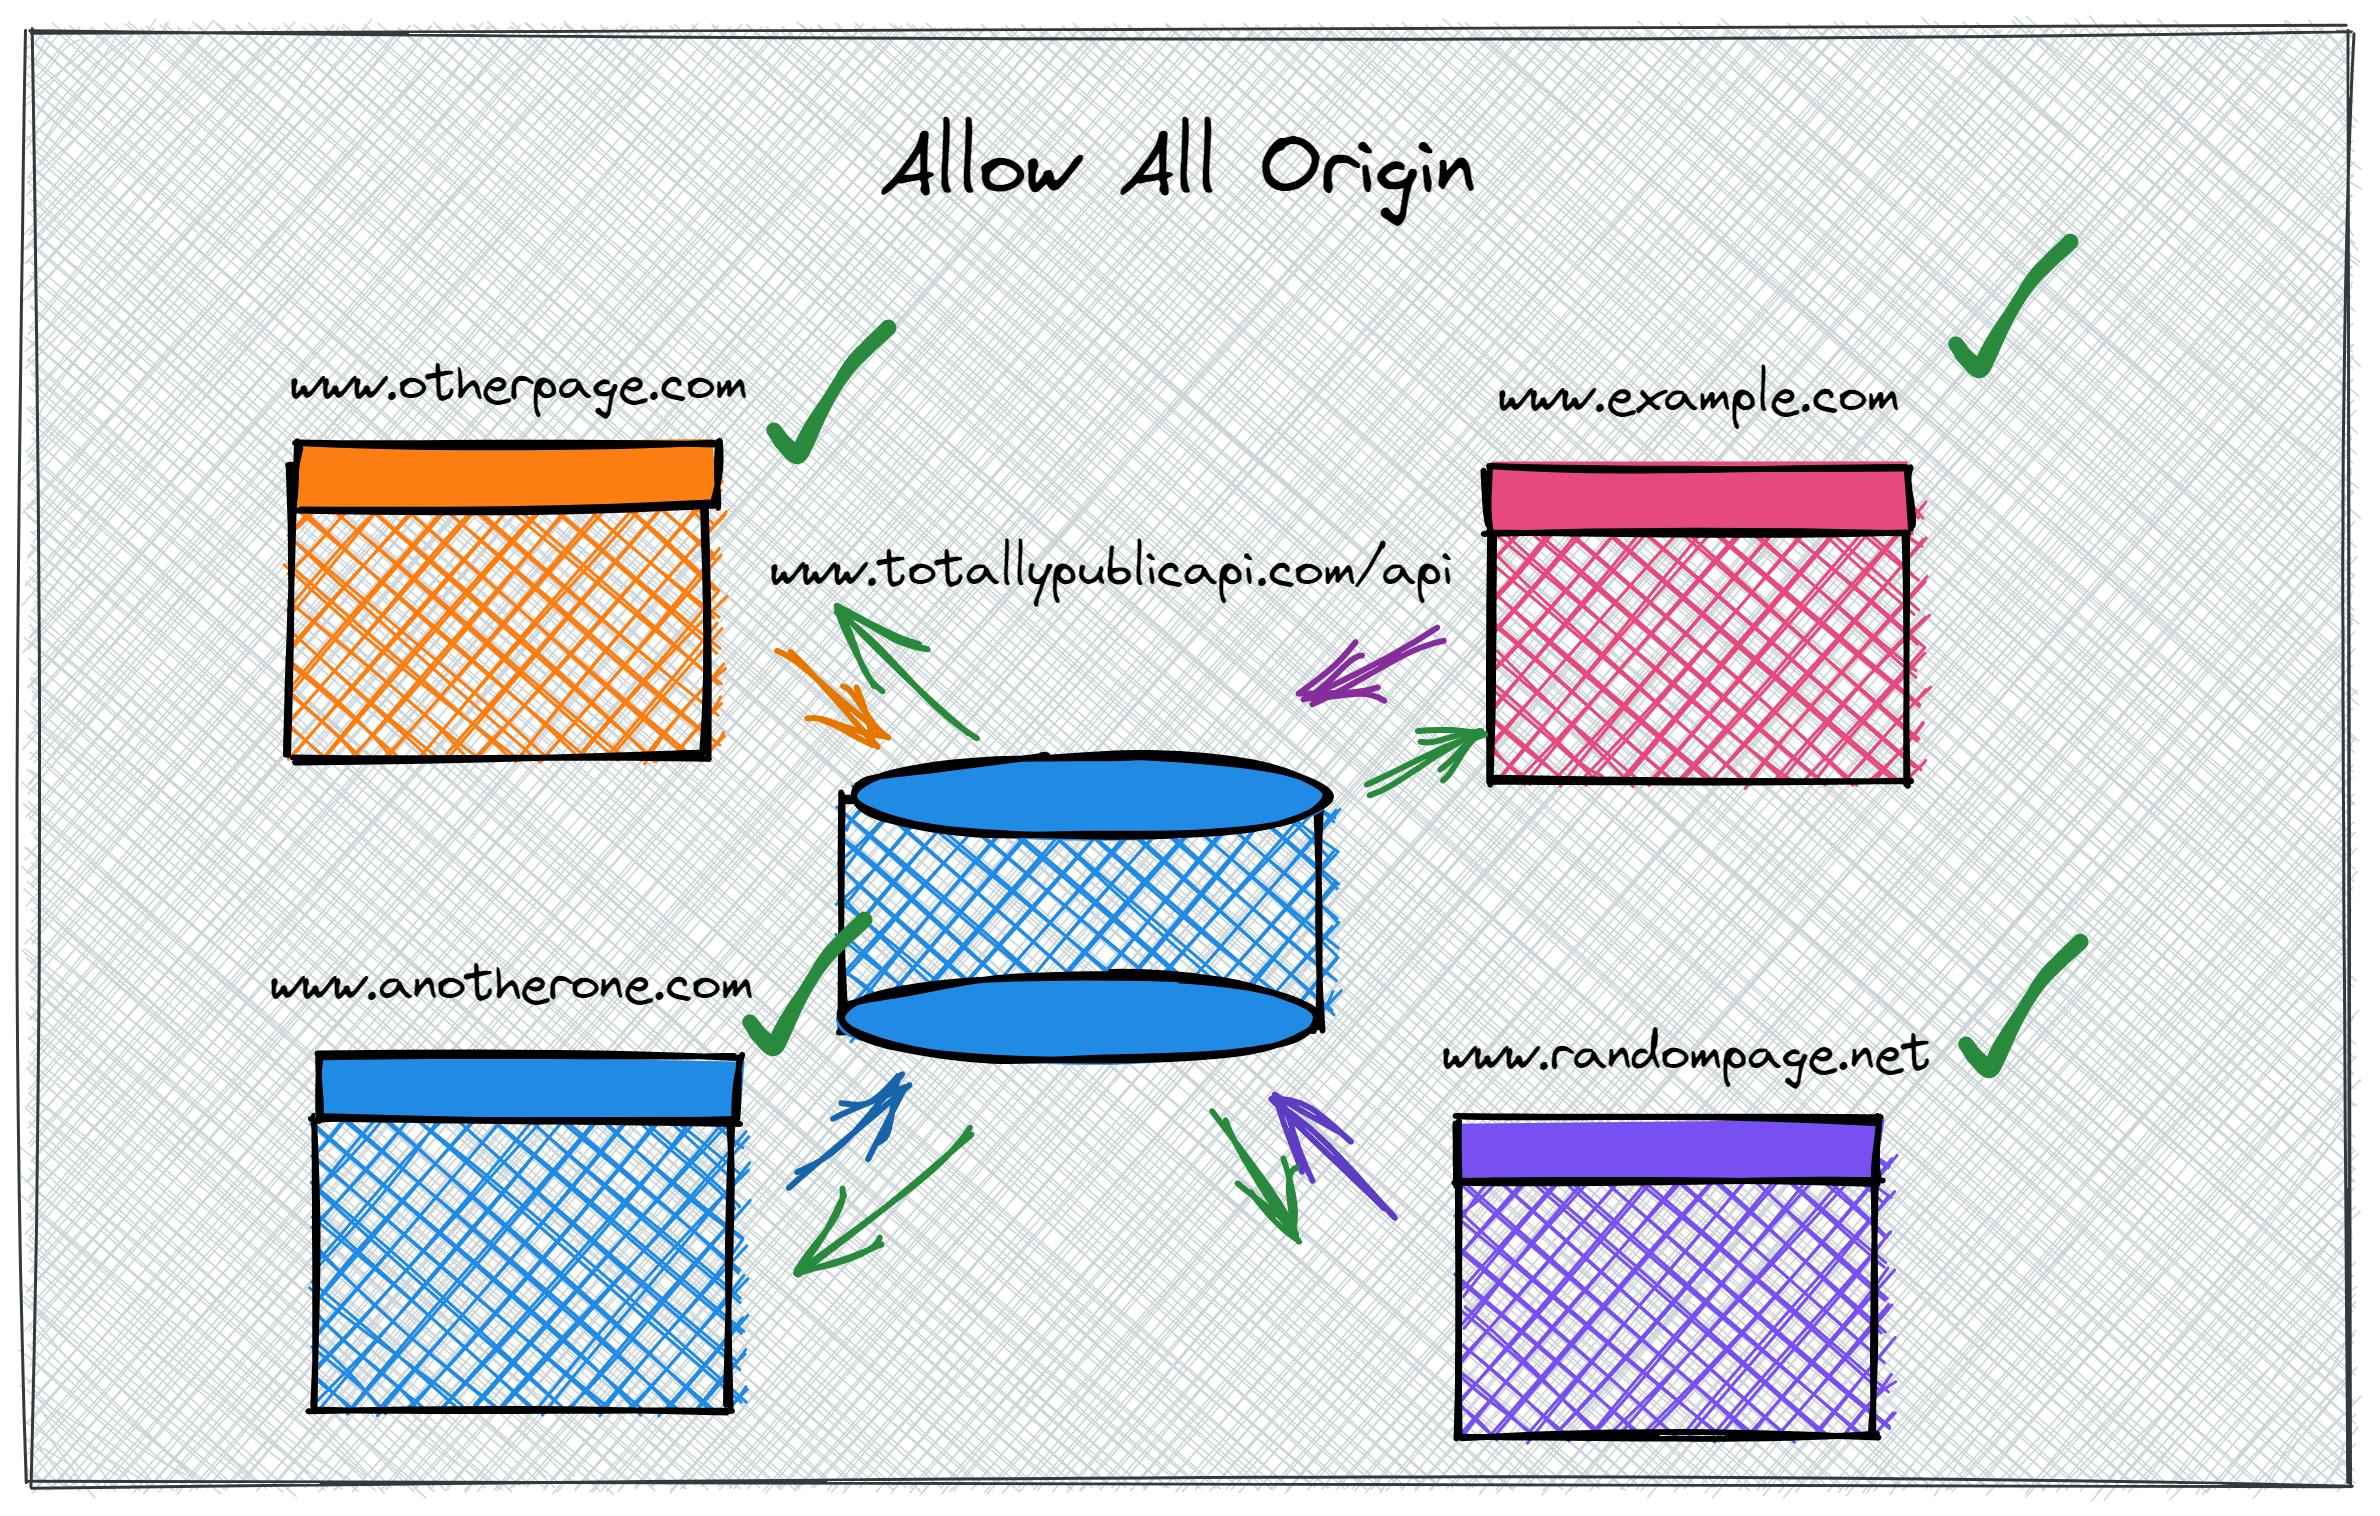 A diagram showing an "allow all origin" CORS policy where any domain is able to make http requests from the browser.